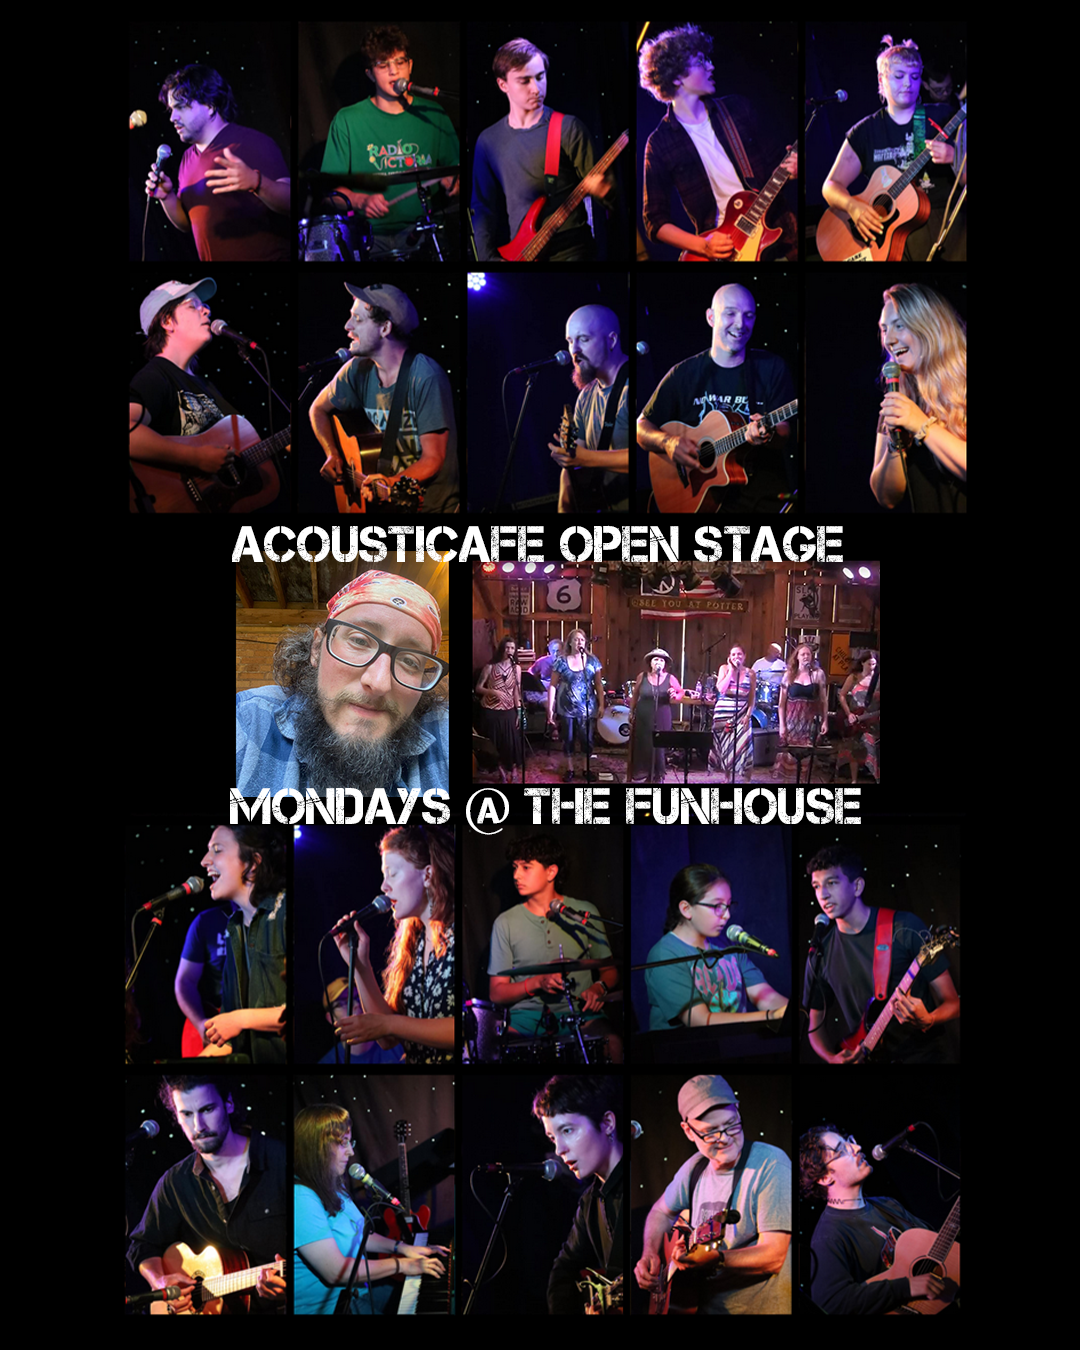 AcoustiCafe Open Stage - Mondays at the Funhouse at Mr Smalls!